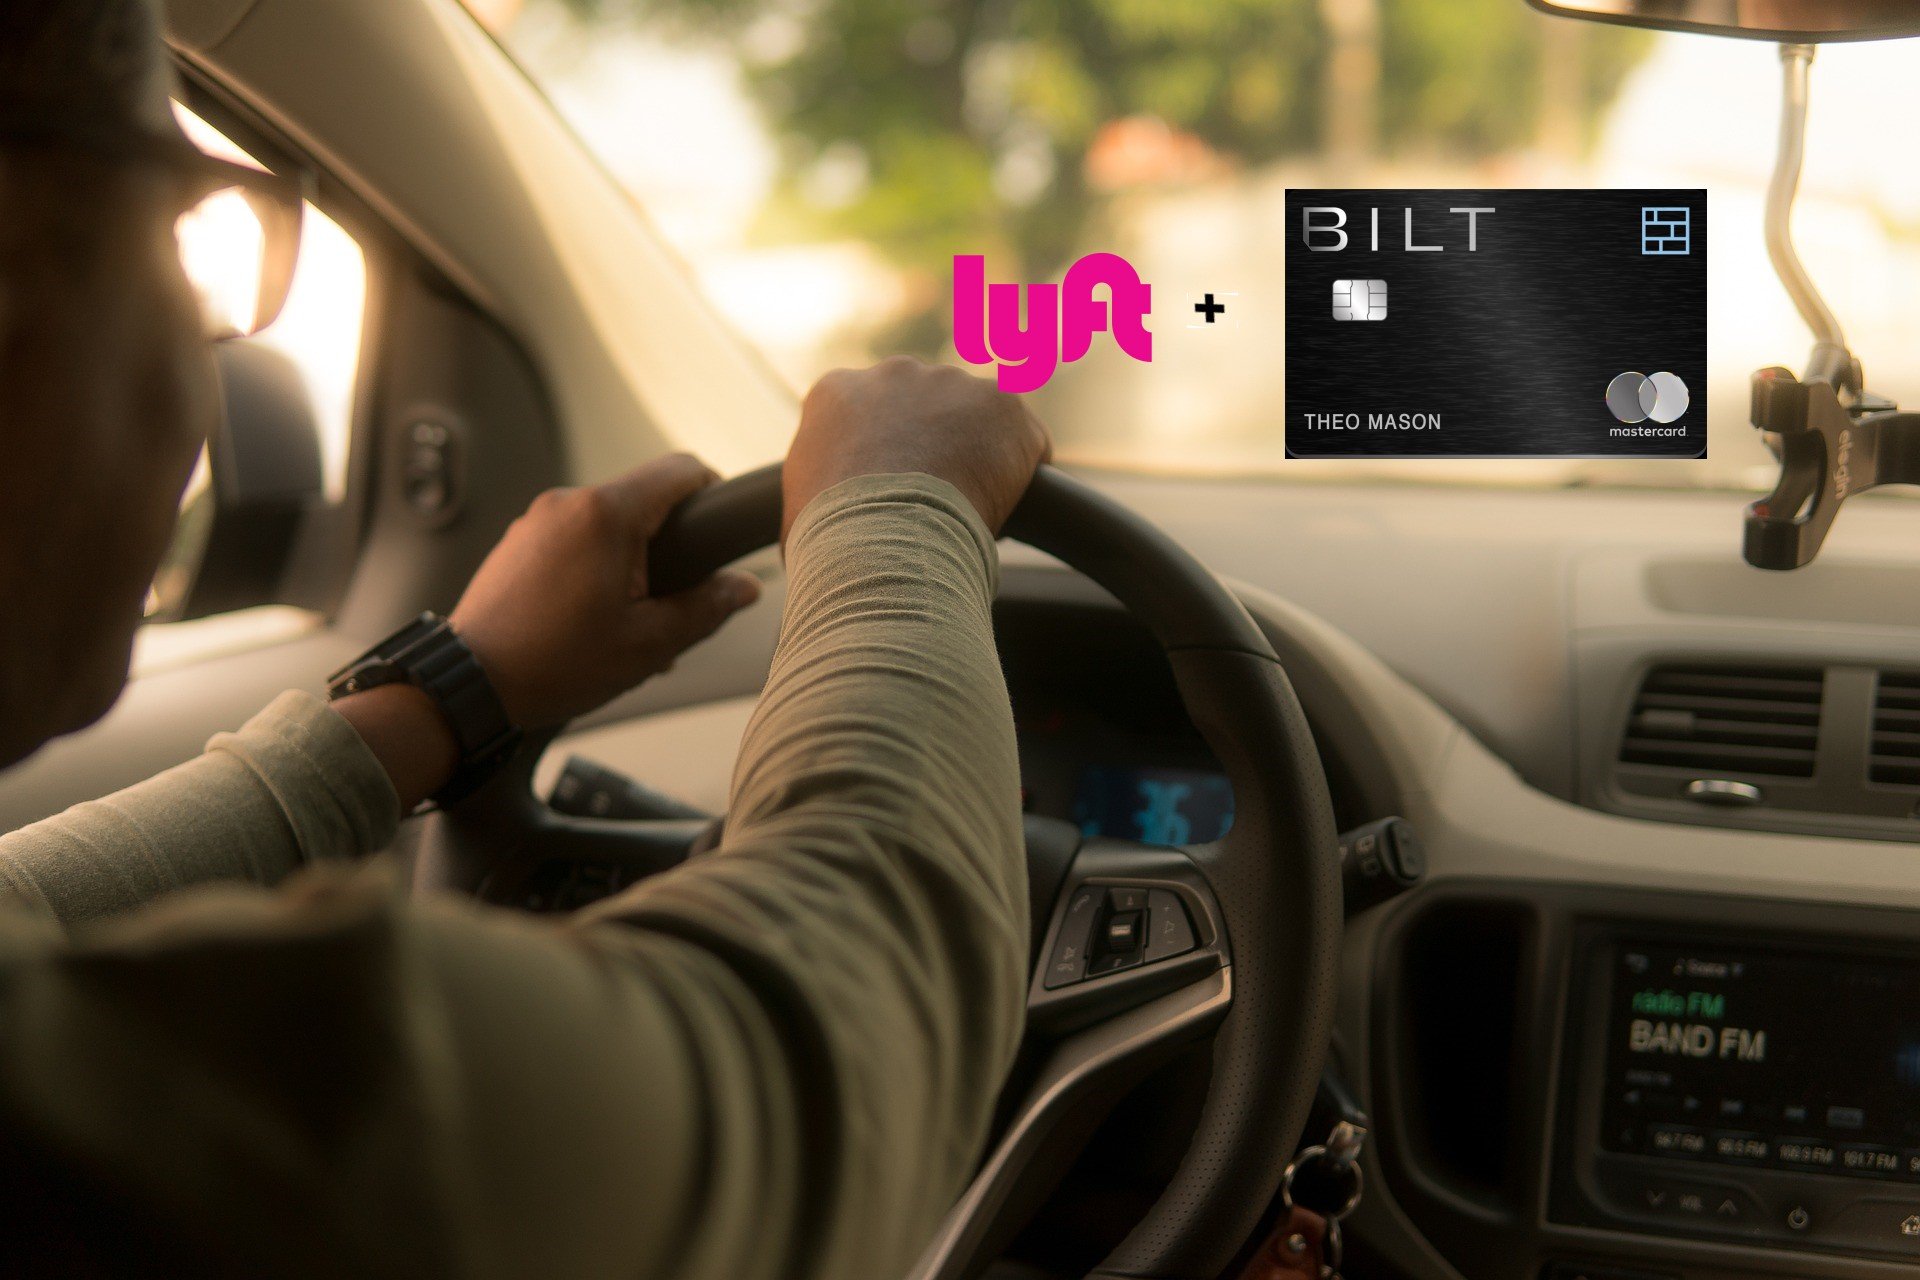 Bilt Mastercard Now Earns 5X points on Lyft rides when using the Bilt Mastercard and linking account to Lyft